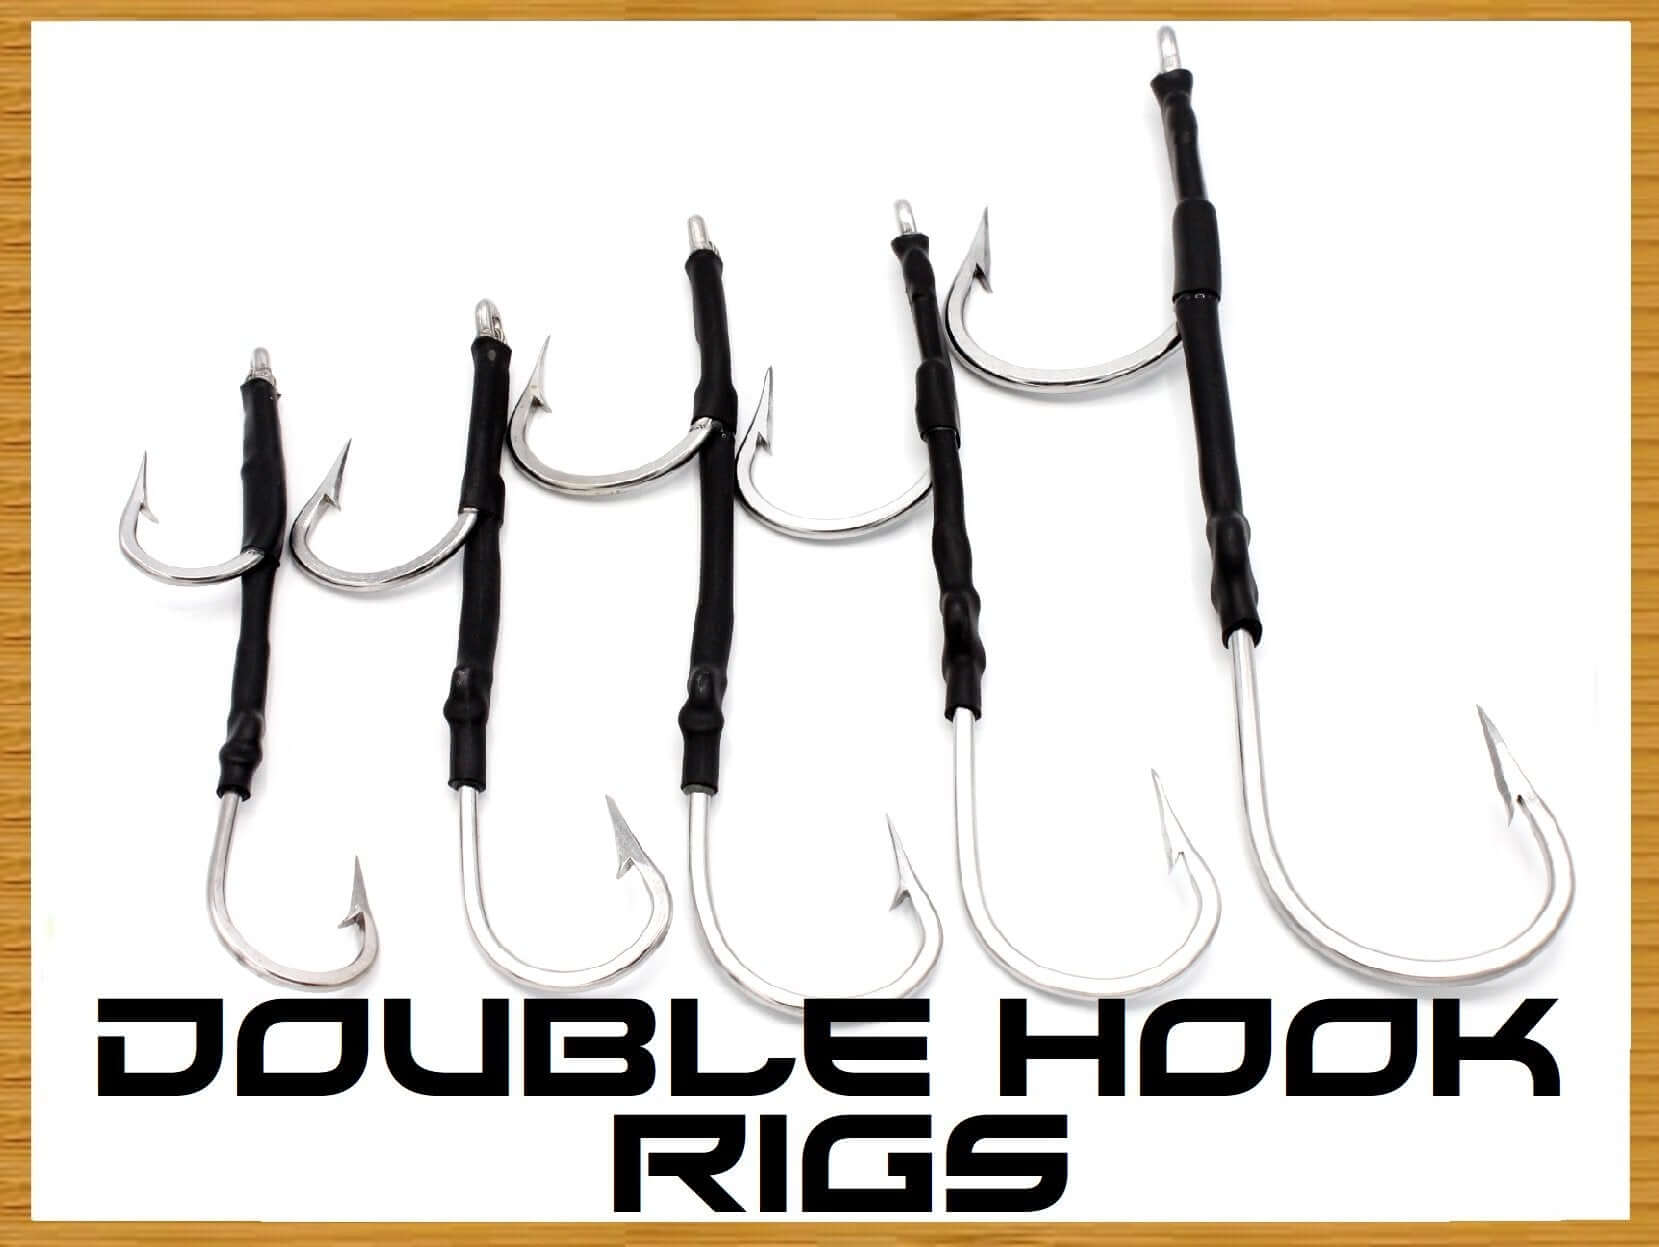 Reef and Rig – Owner Hooks